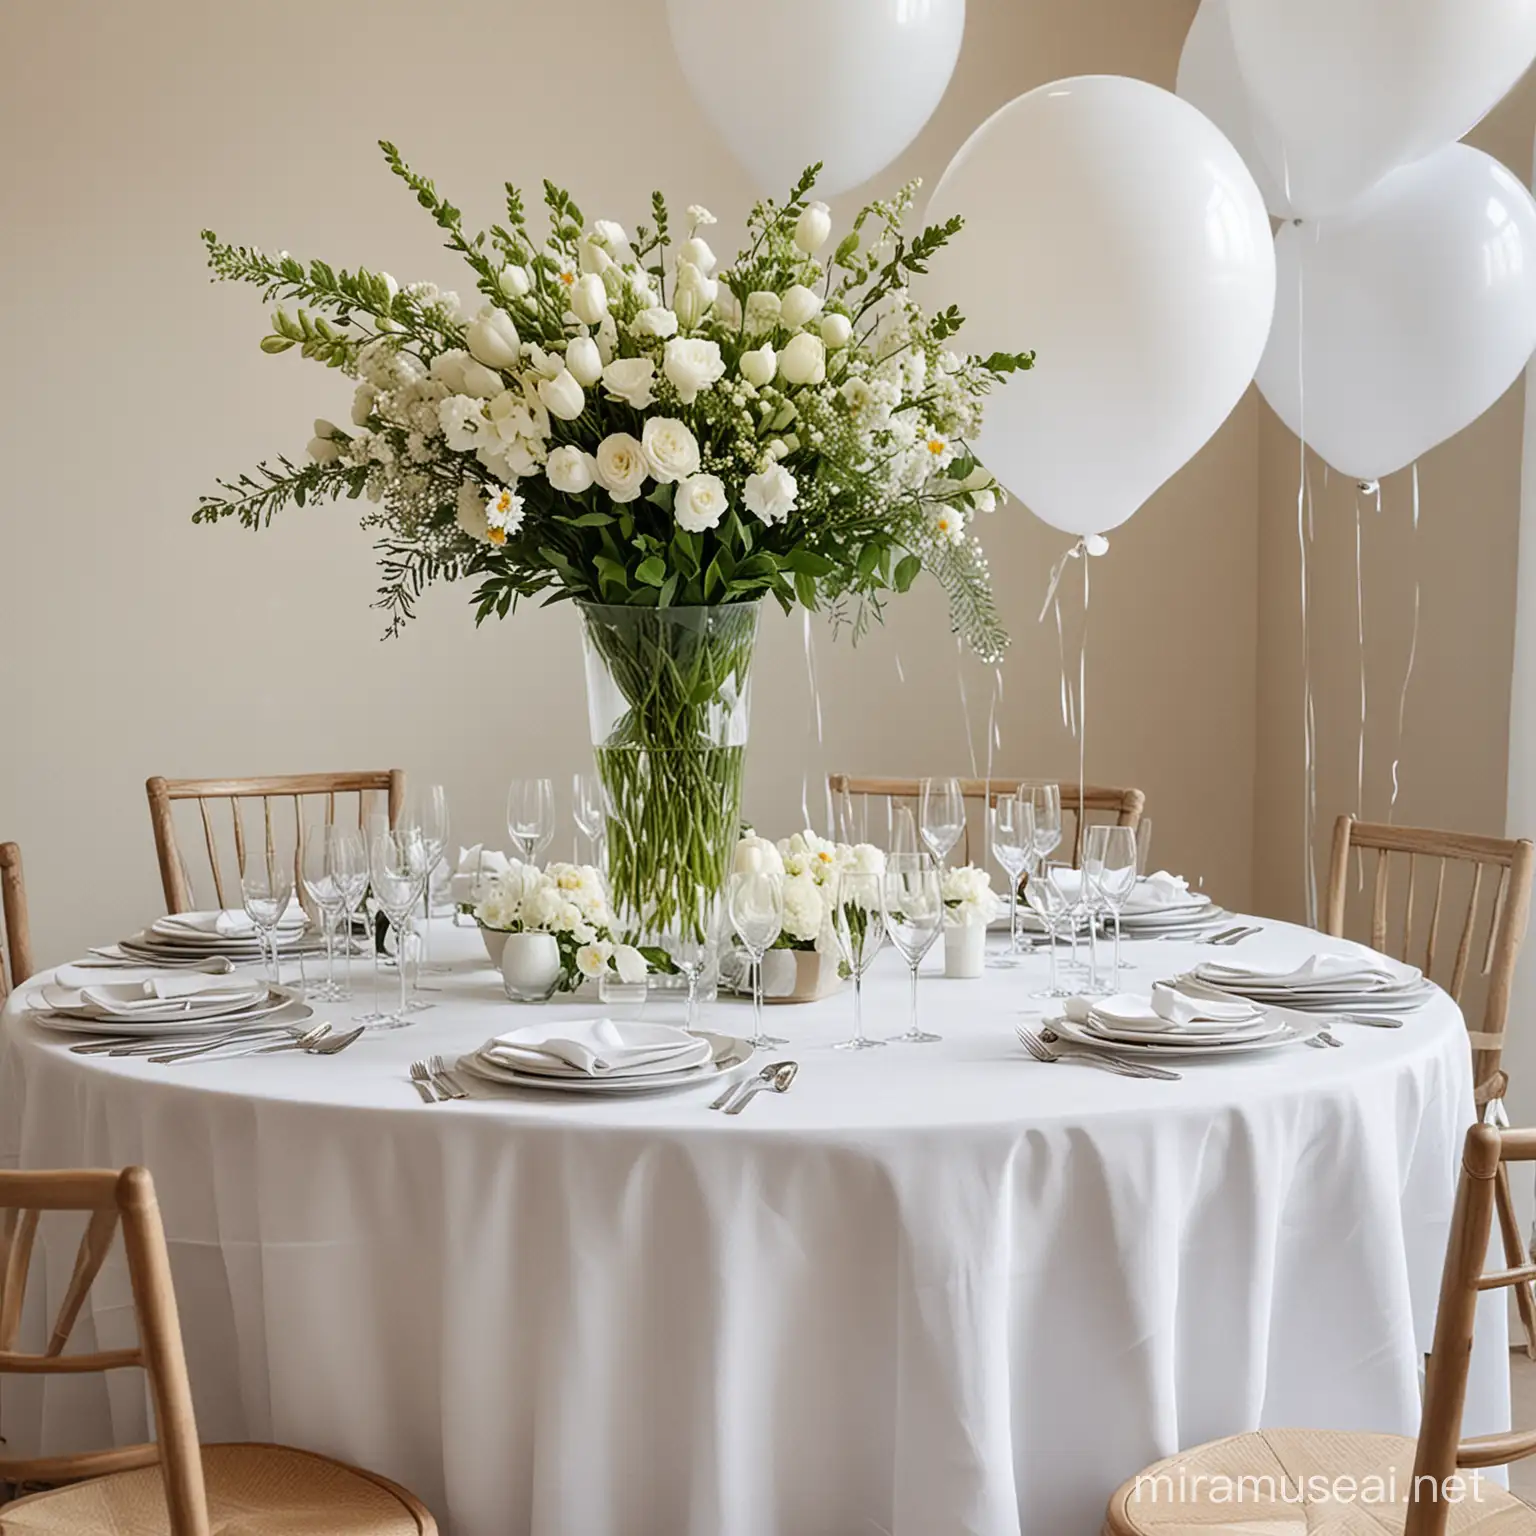 Elegant Springtime Garden Party Table Setting with Fresh Flowers and Balloons